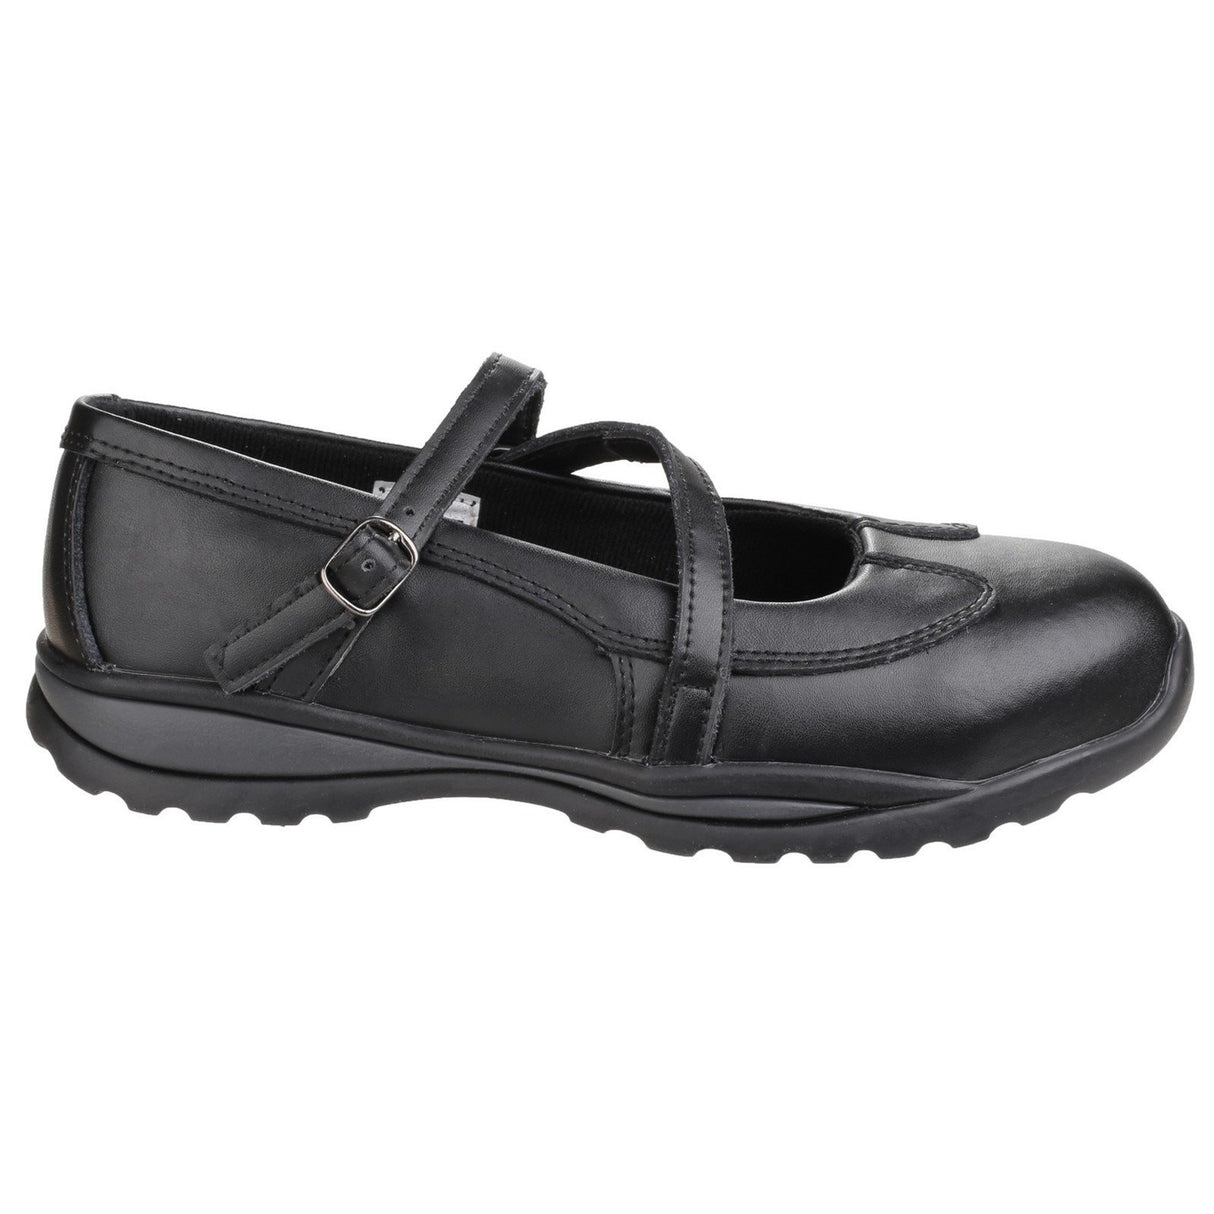 Amblers Safety Ladies Buckle Safety Shoes